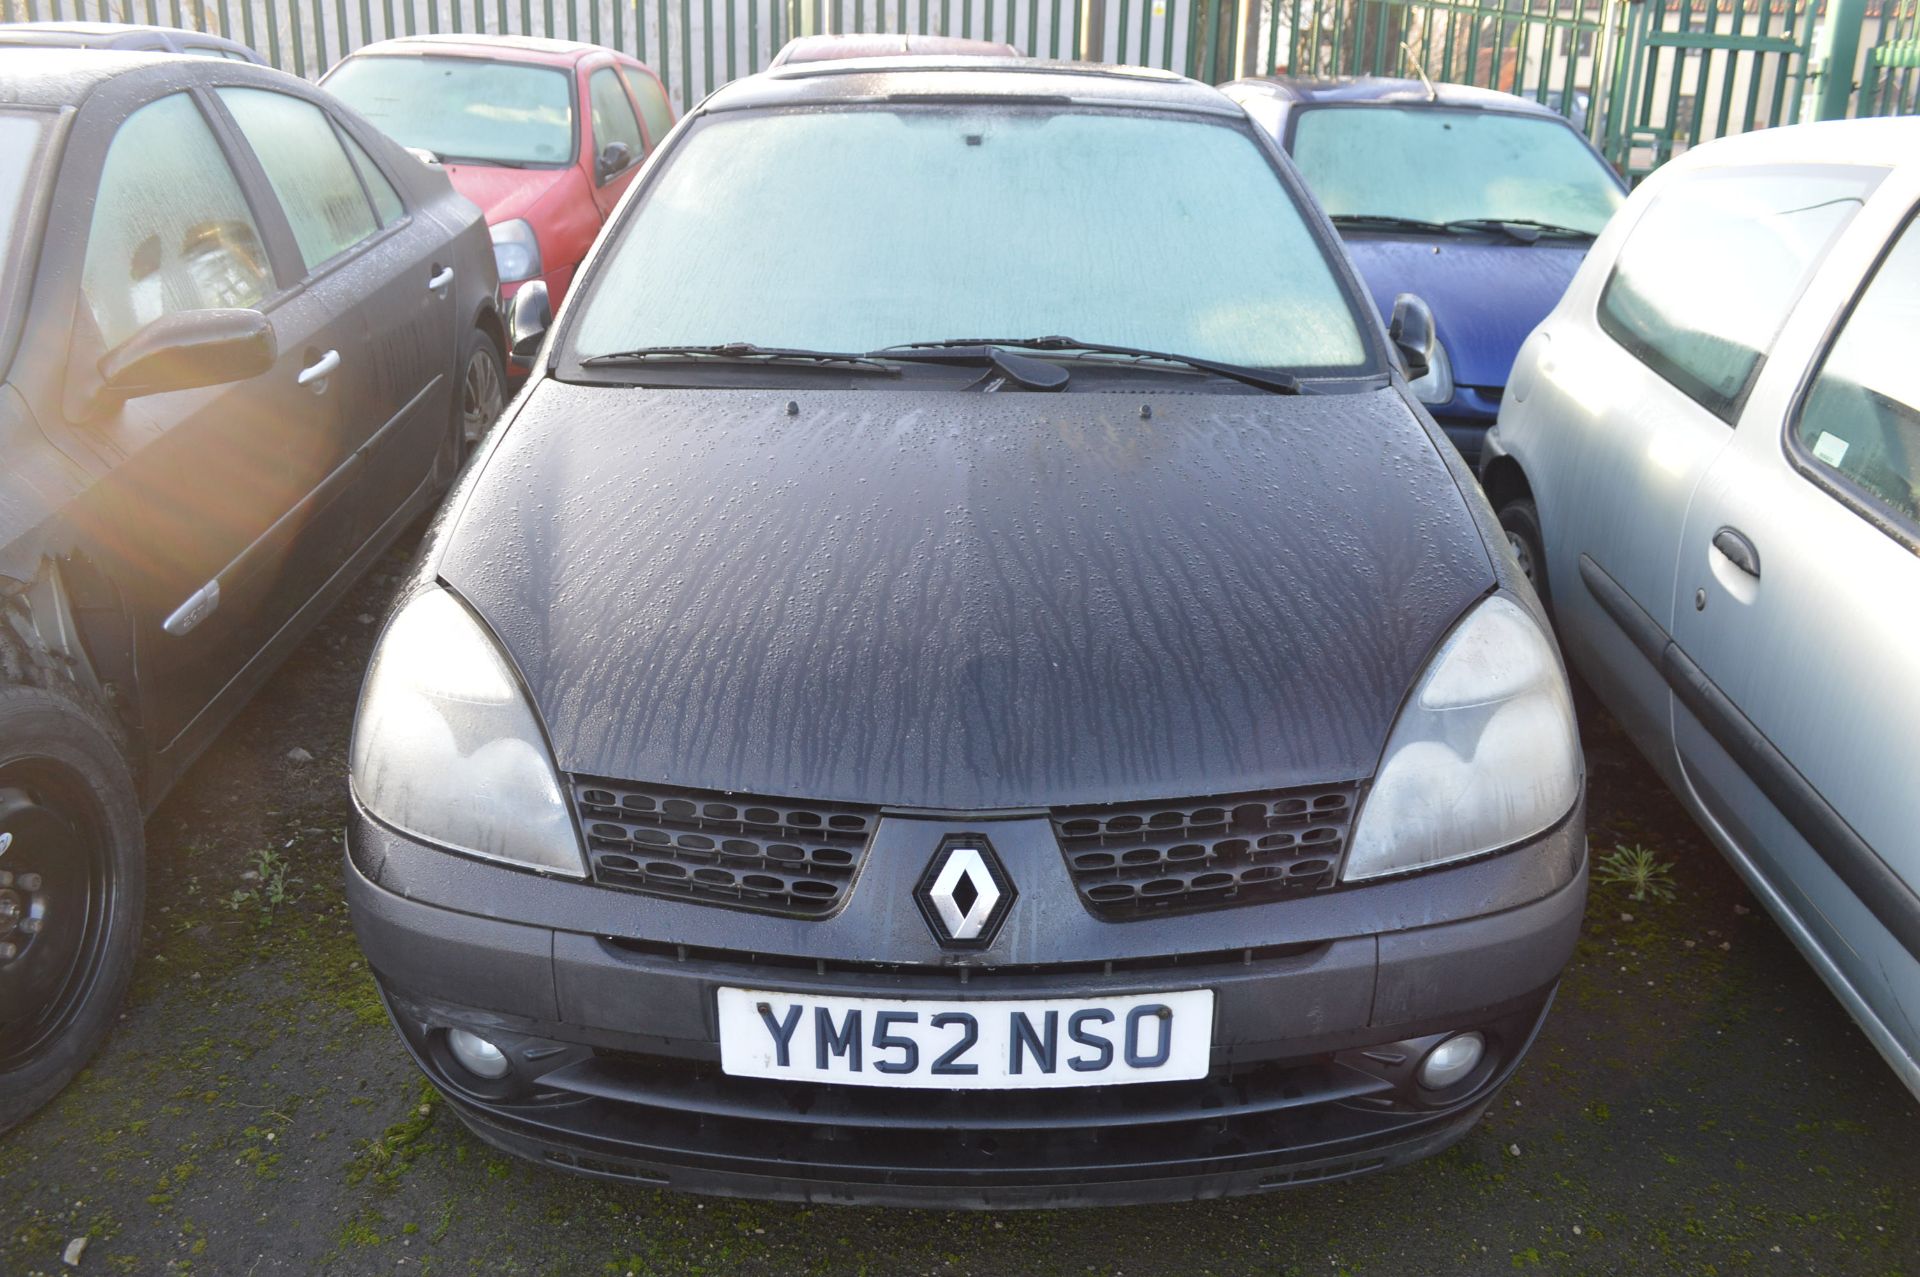 2003/52 REG RENAULT CLIO DYNAMIQUE - SELLING AS SPARES / REPAIRS *NO VAT* - Image 2 of 12